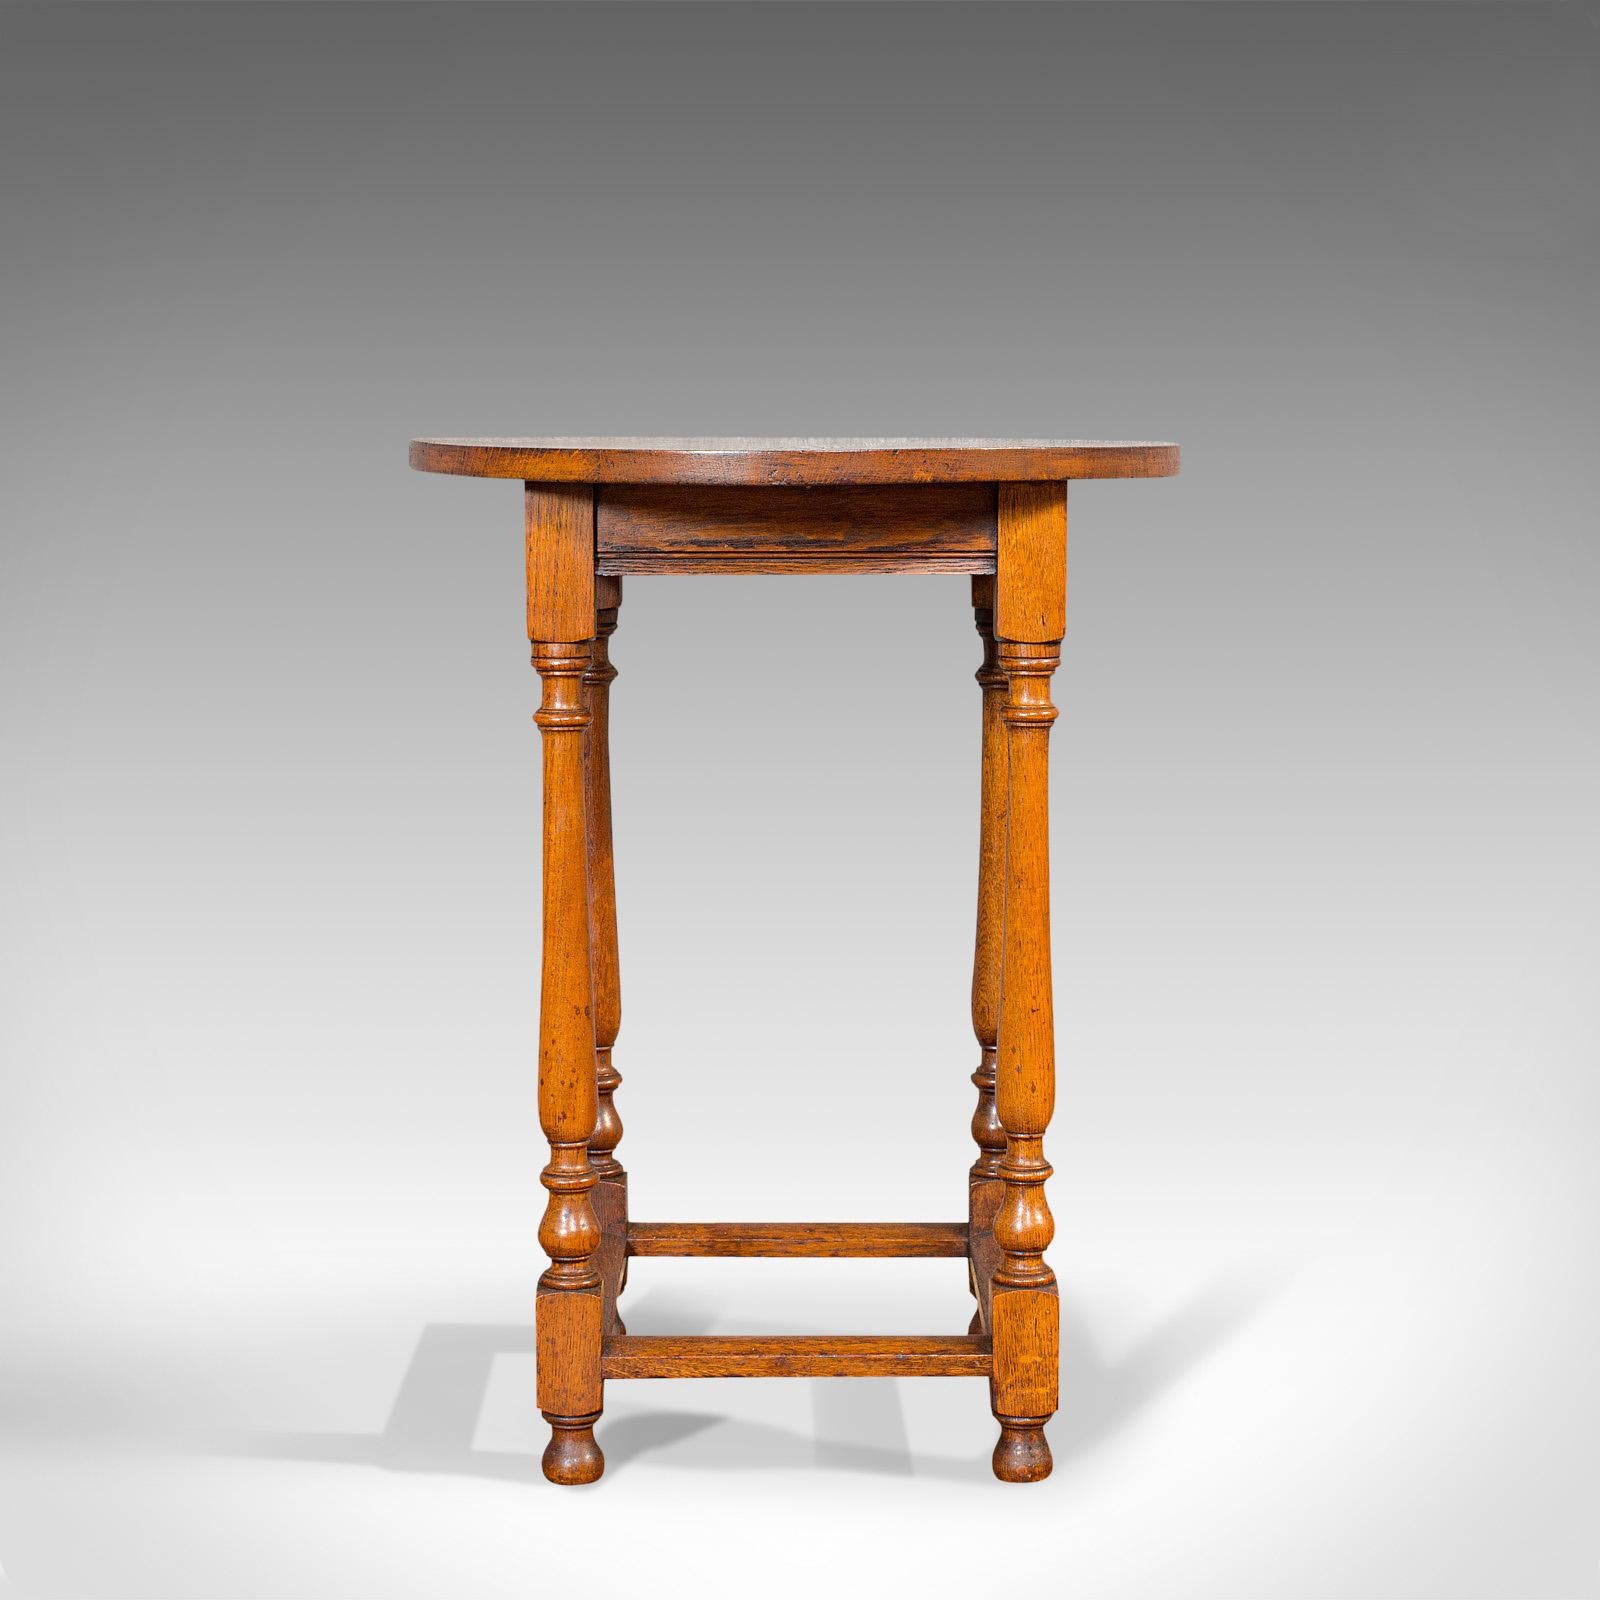 This is an antique circular occasional table. An English, oak side or lamp table, dating to the Edwardian period, circa 1910.

Appealing, circular side table
Displays a desirable aged patina
Select oak shows fine grain interest
Rich caramel